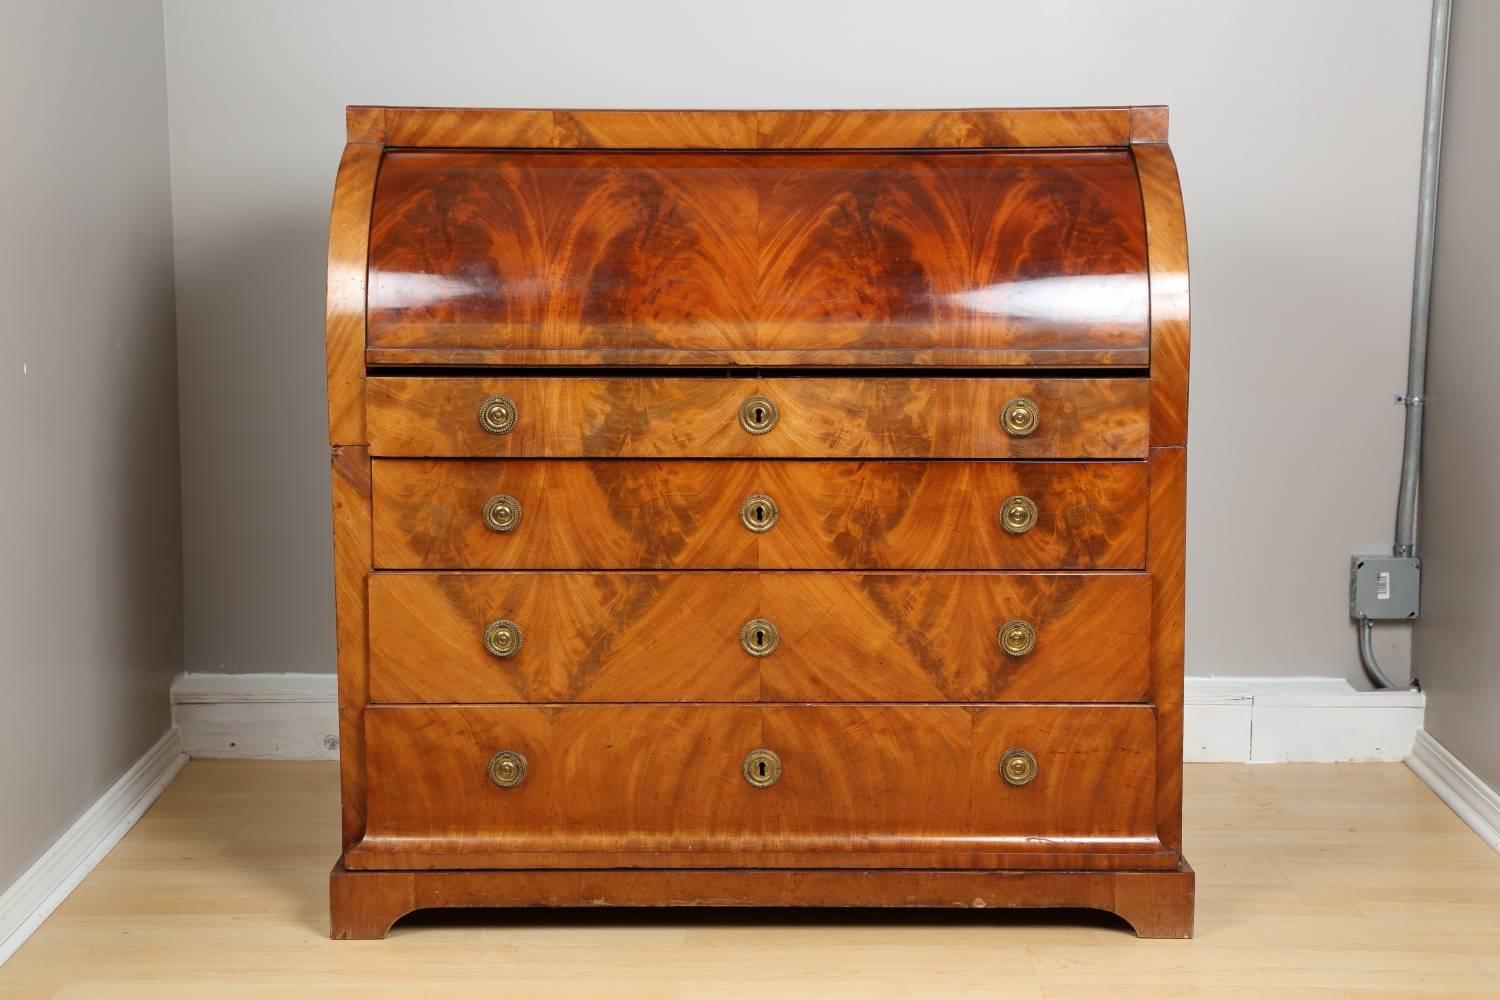 Biedermeier mahogany root secretaire, circa 1820. Elegant mahogany root veneer secretaire from Germany Biedermeier period in very good original condition. Four drawers and a retracting top revealing additional storage compartments. Top drawer serves